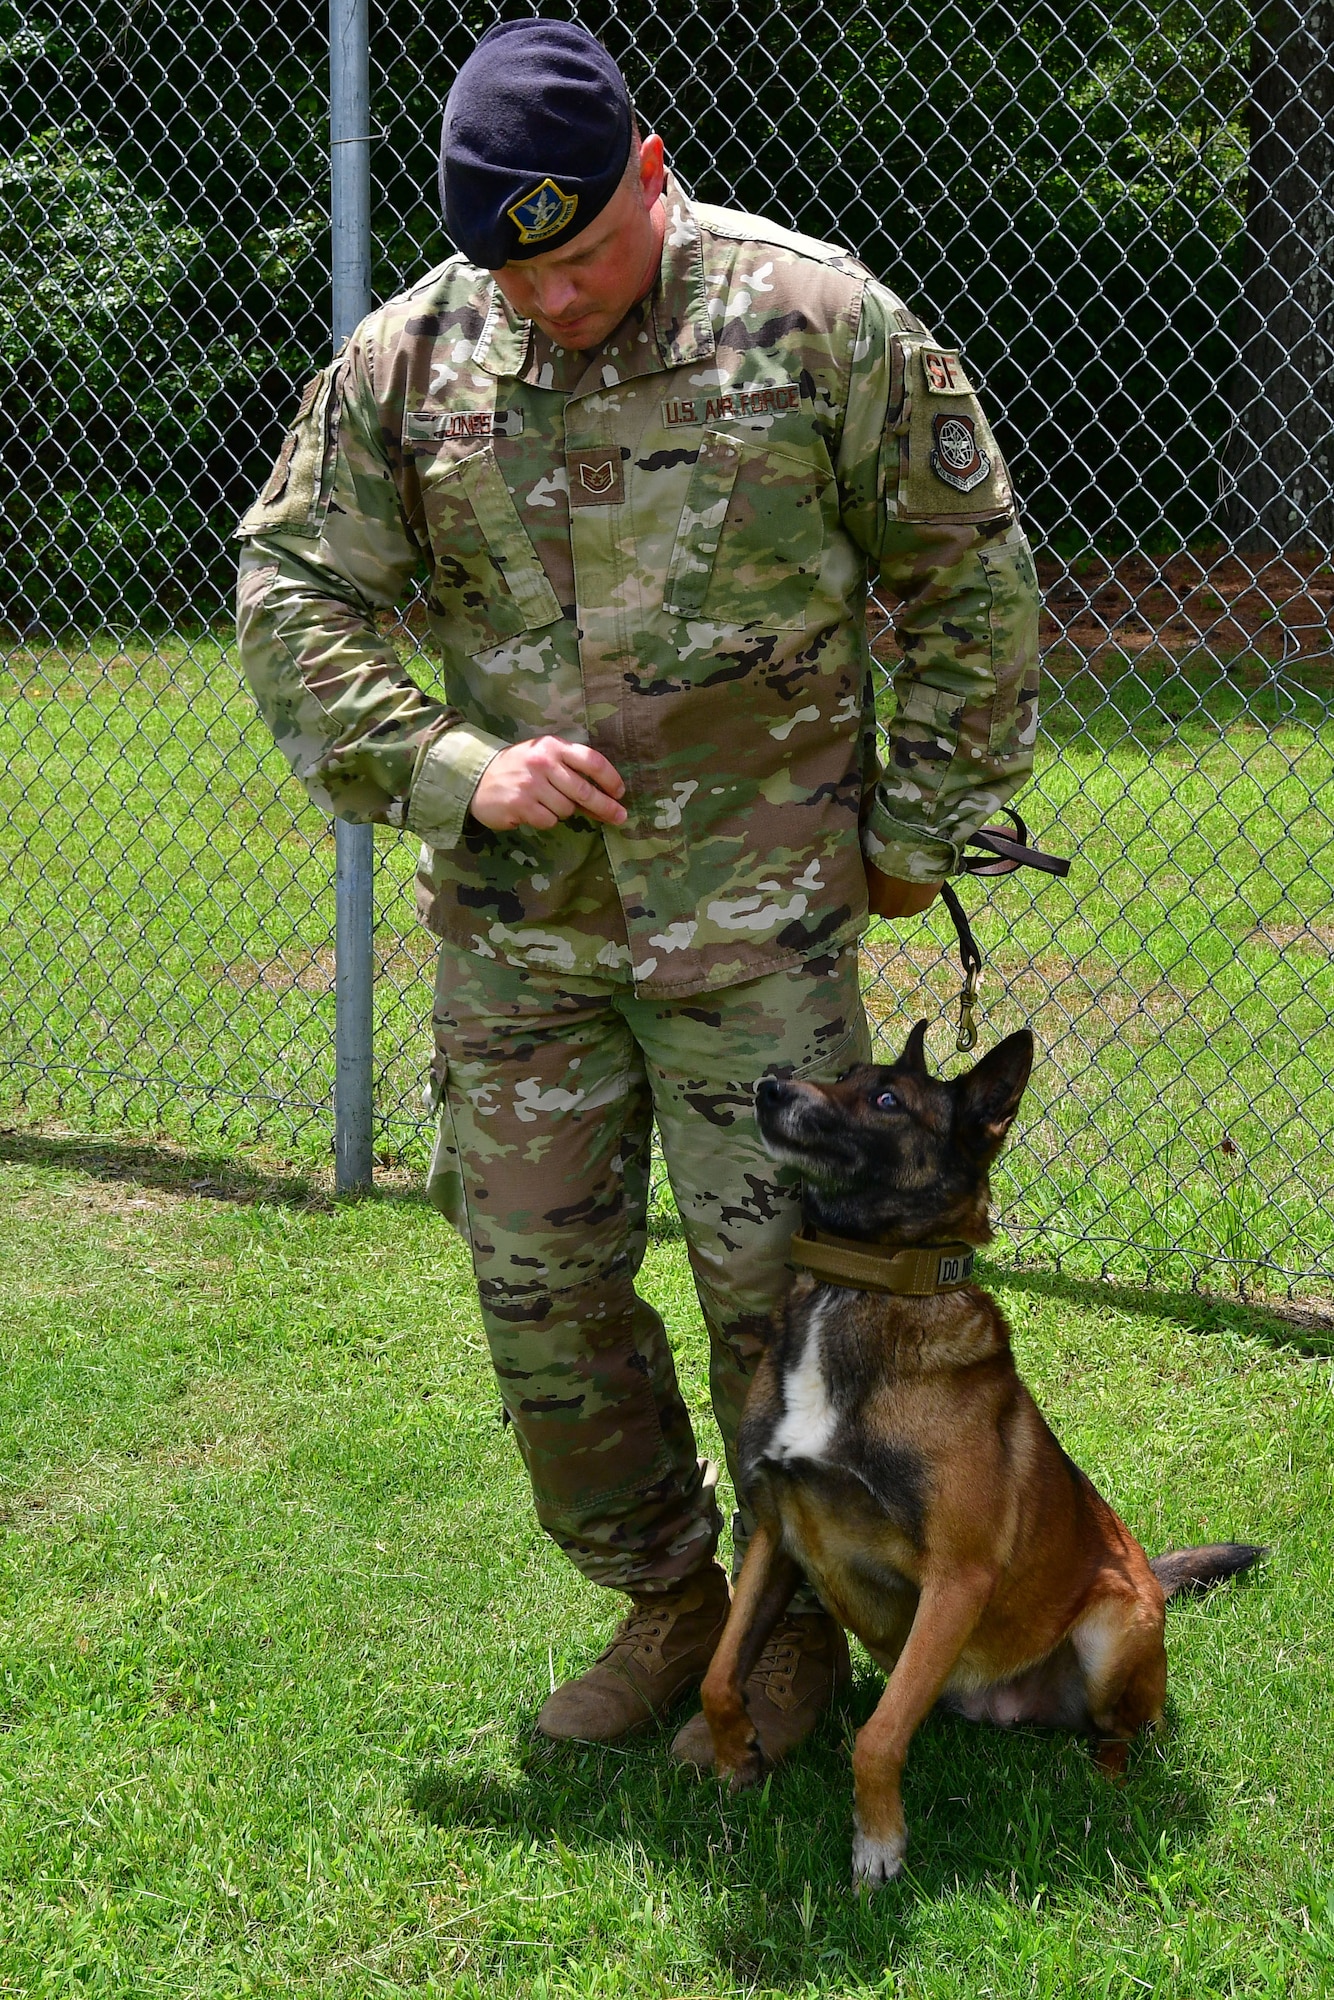 Tech. Sgt. Brooks Jones, 19th Security Forces Squadron military working dog trainer and handler, and MWD Alfa, prepare for the obedience training course at Little Rock Air Force Base.